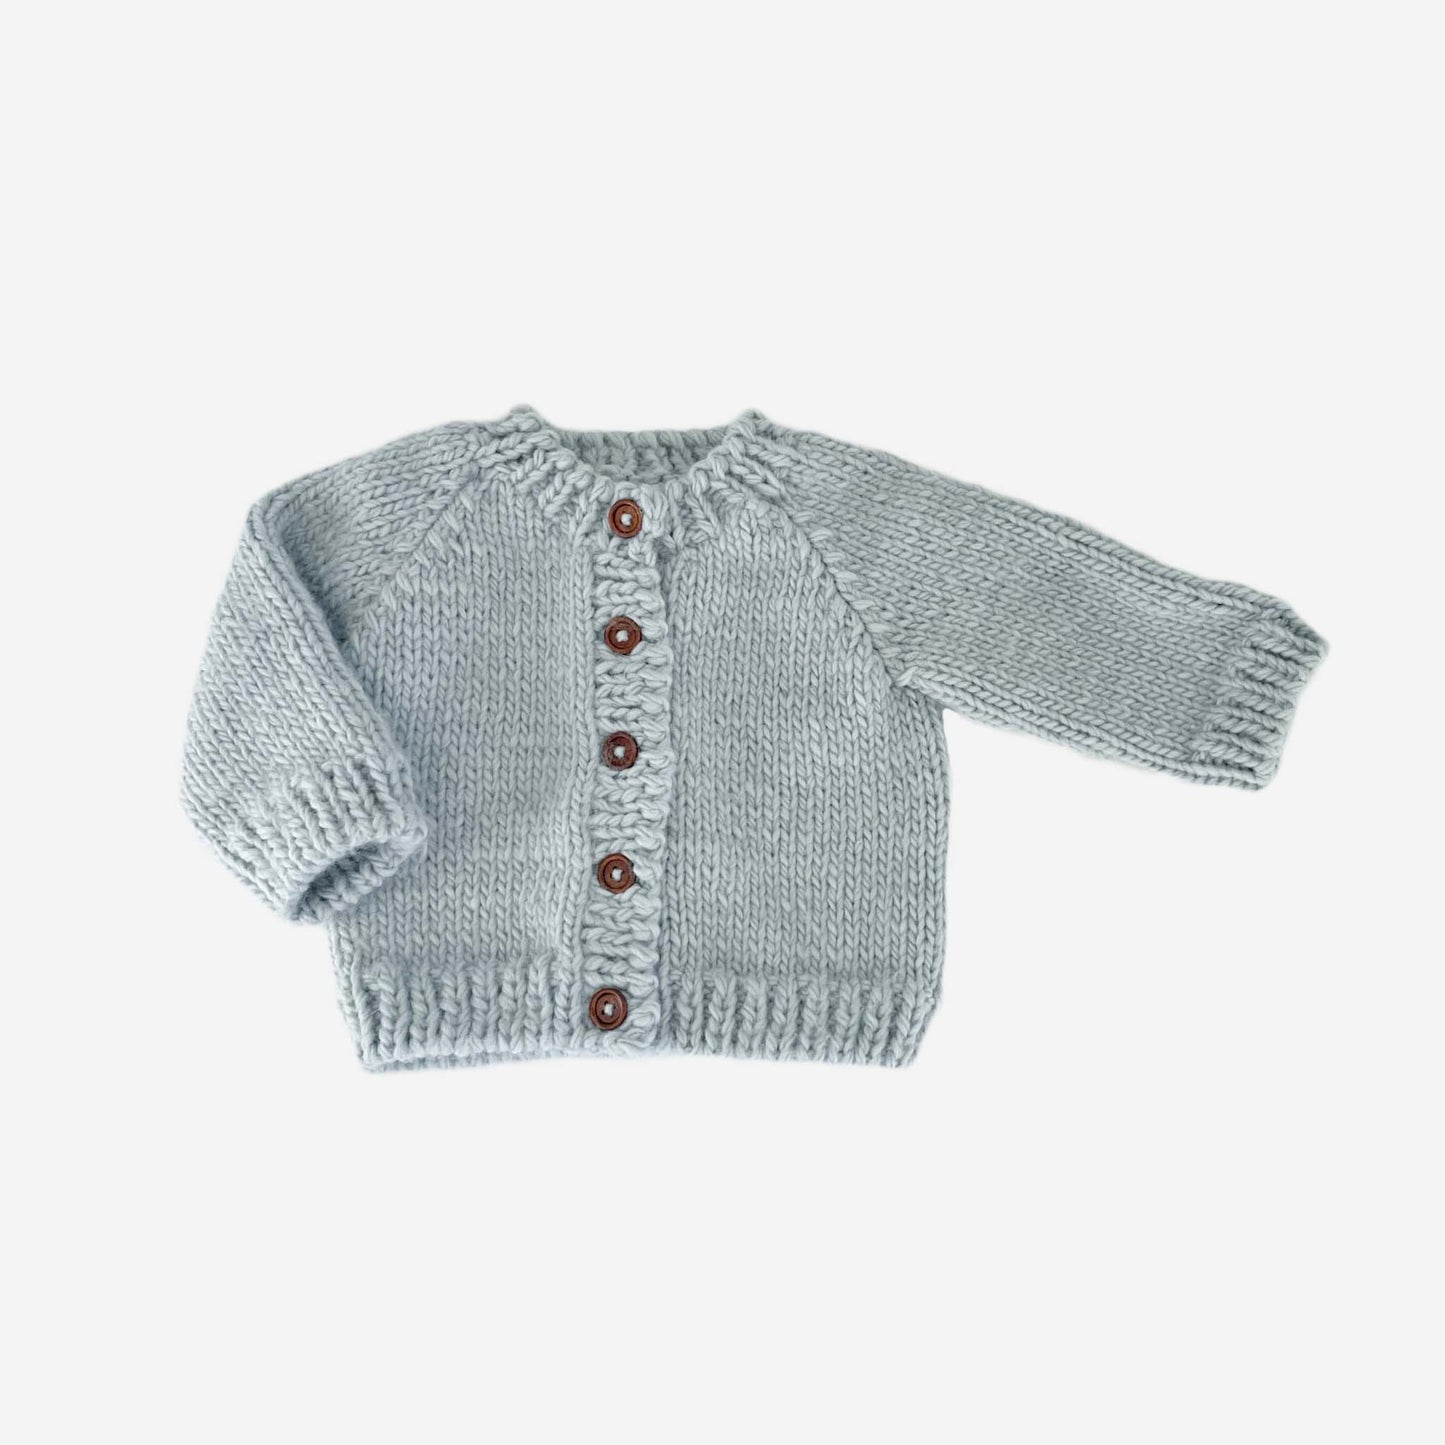 Cardigan by the Blueberry Hill | Bowie Gray